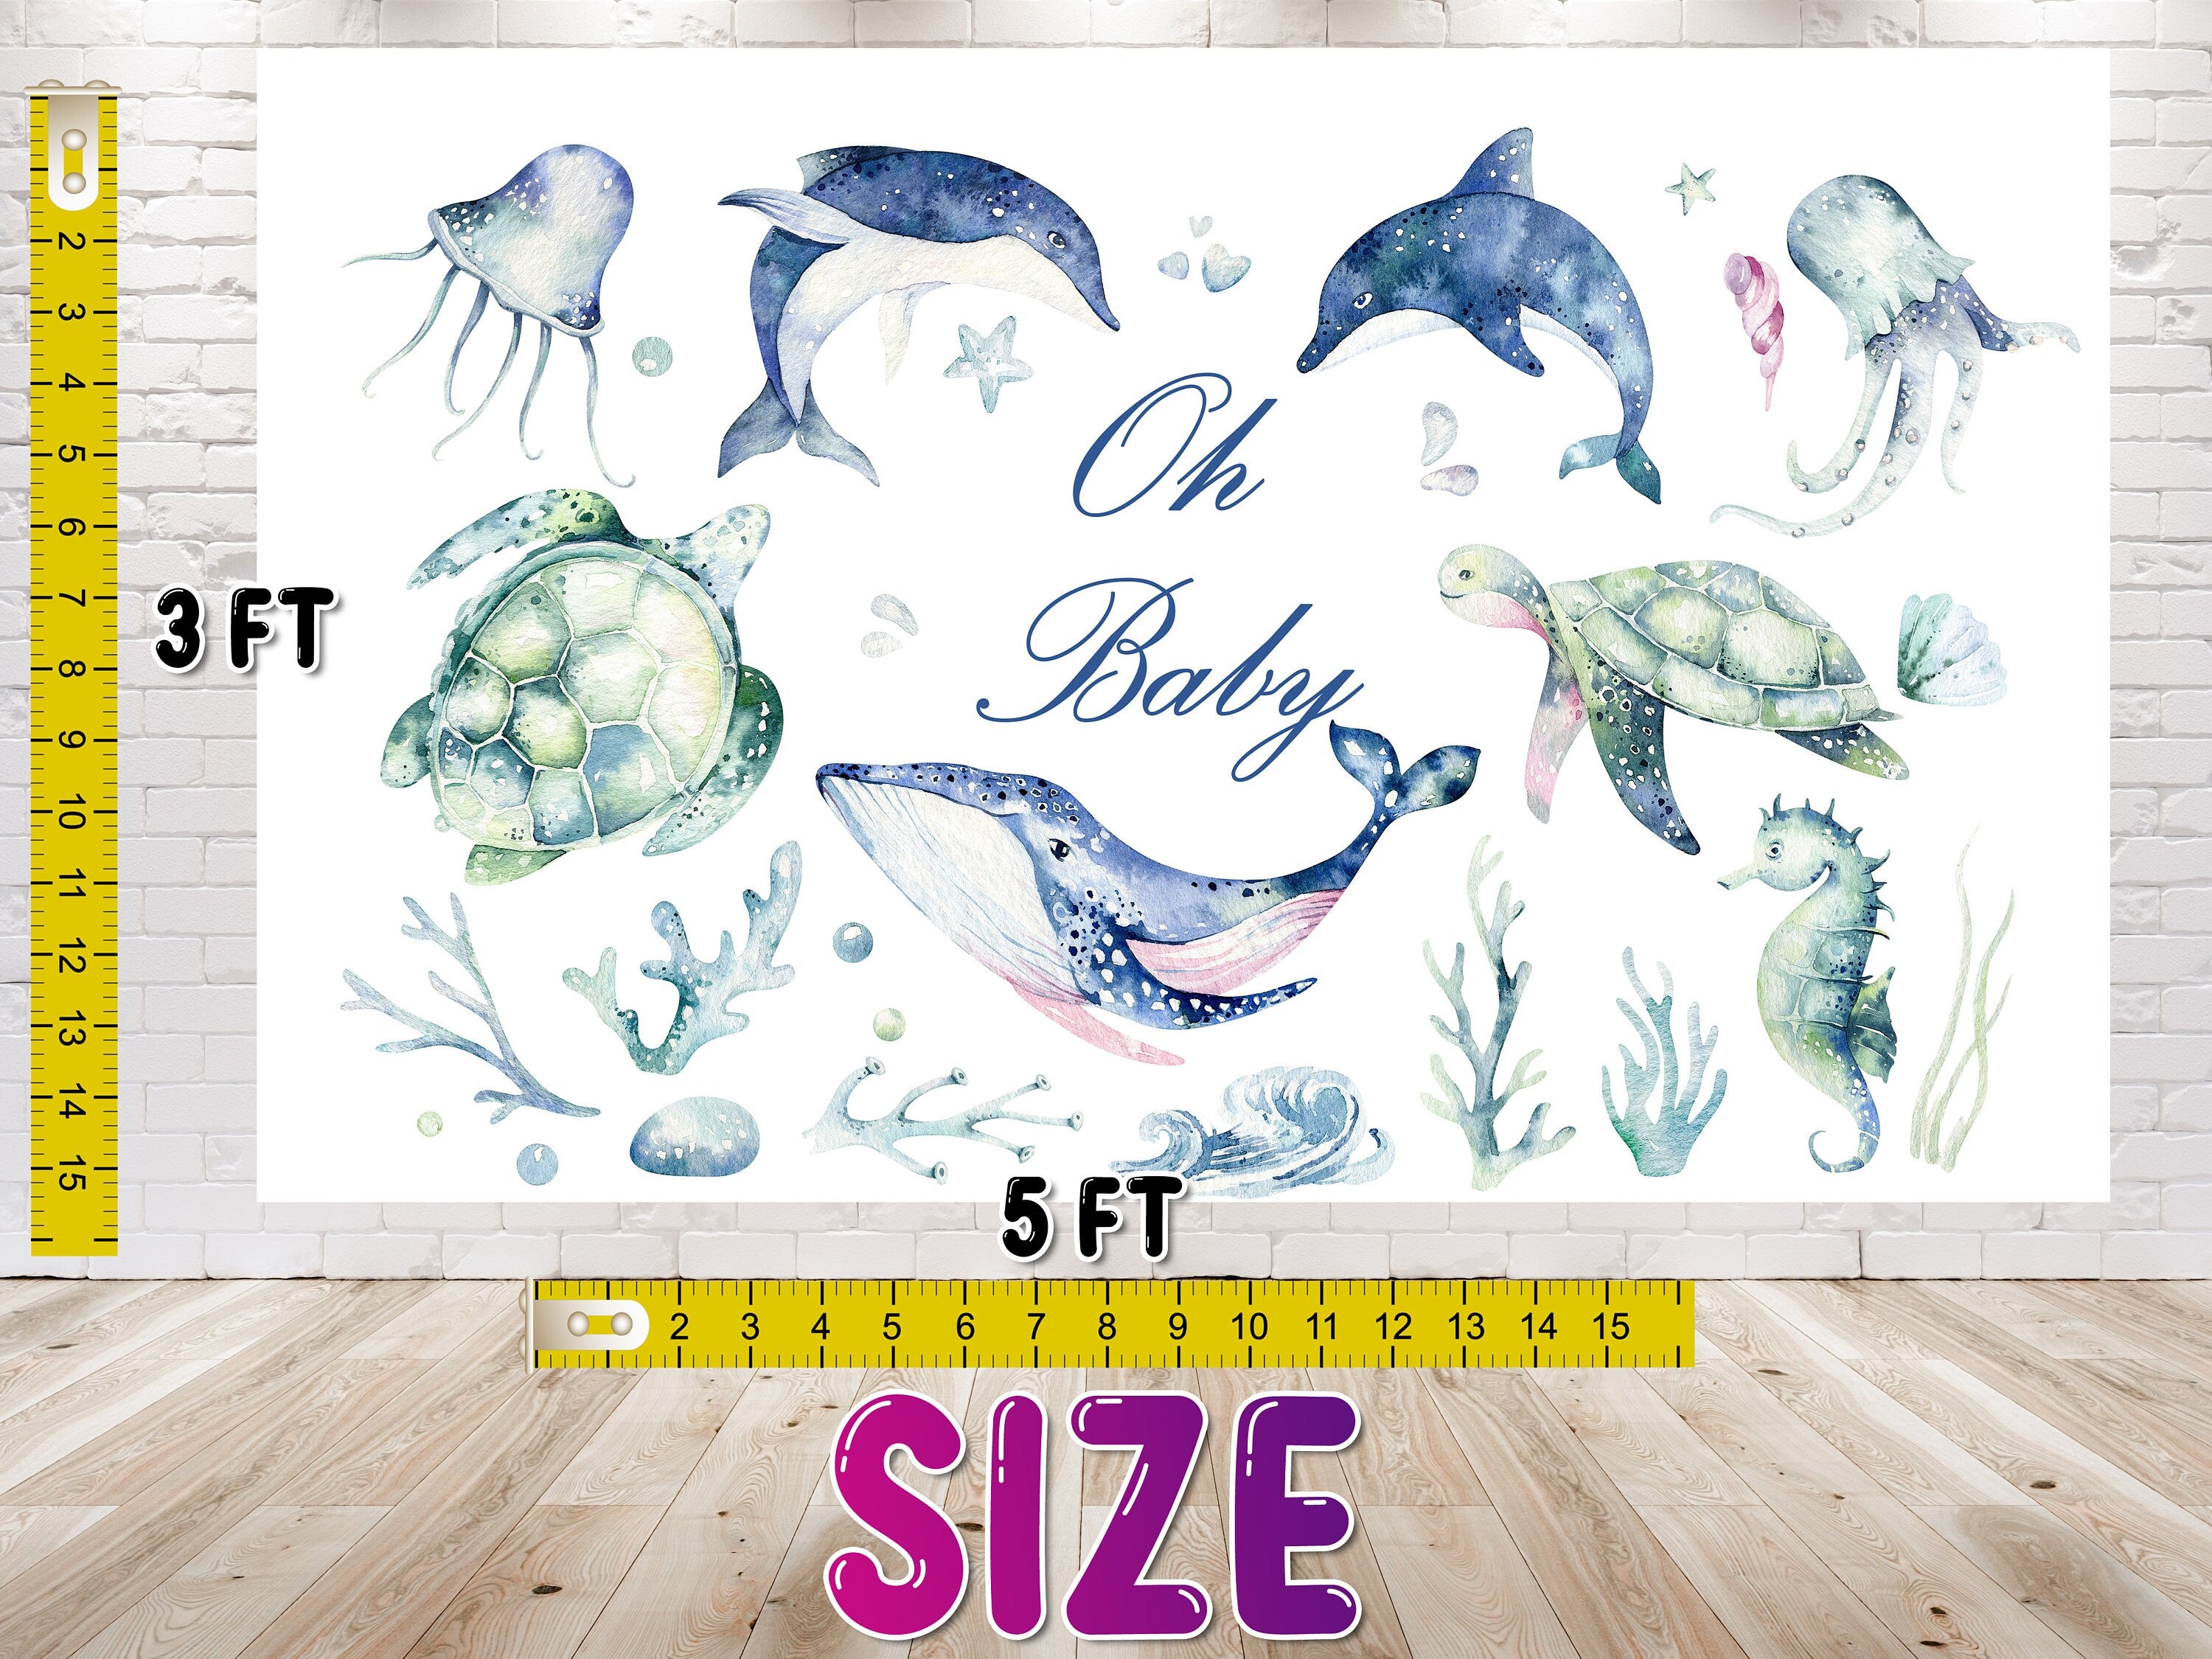 "Oh Baby Whales" Marine-Themed Baby Shower and Birthday Backdrop 5x3 FT - Oceanic Celebration Decor